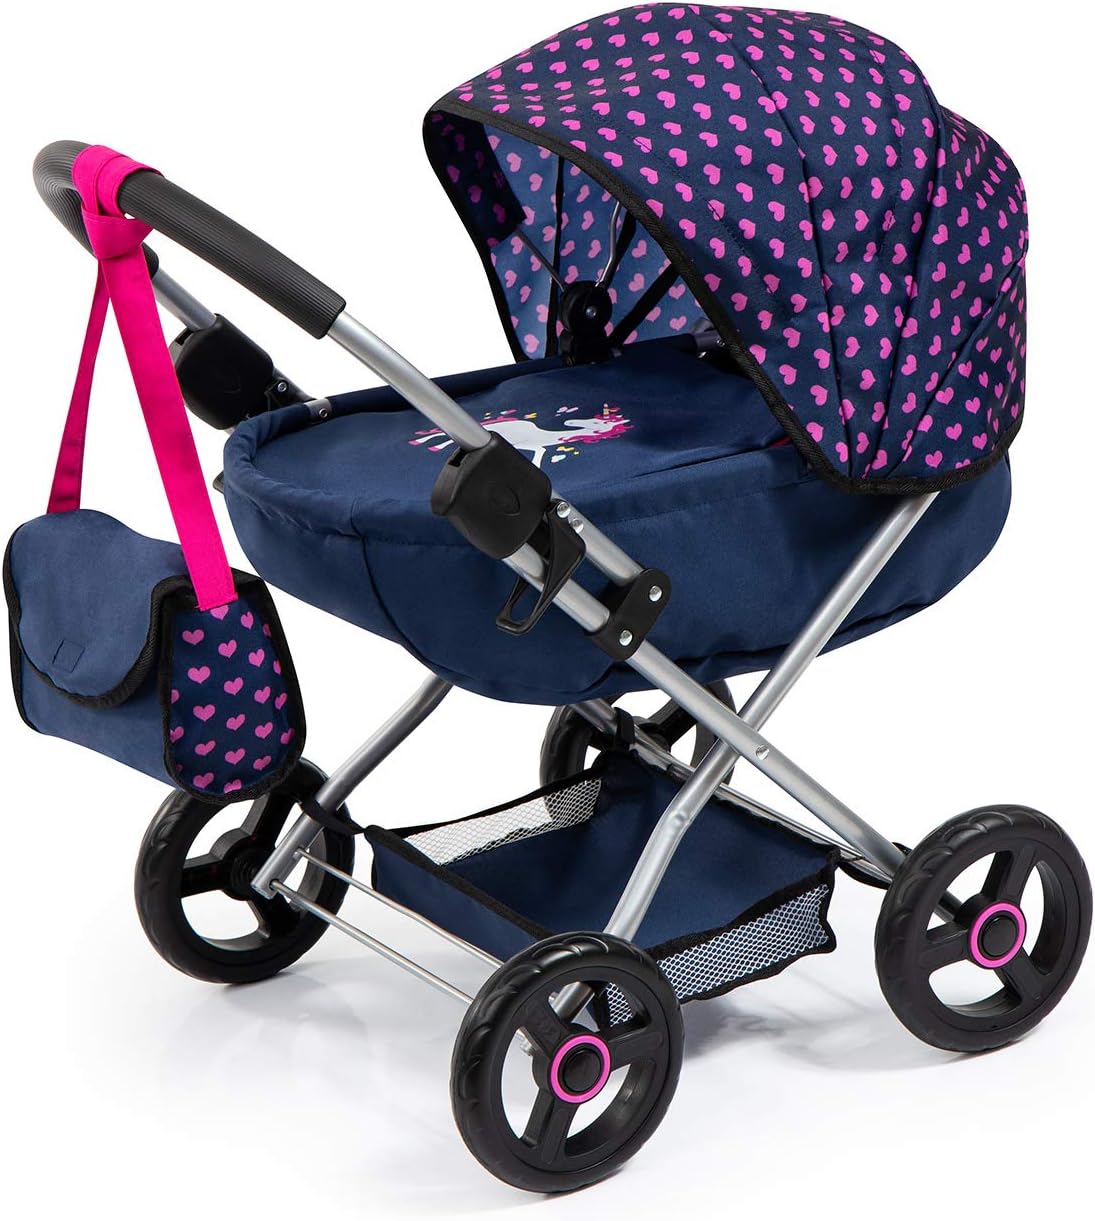 Bayer Dolls 4-in-1 Toy Baby Doll Pram Stroller Cosy Set - Dolls up to 18" (Blue/Purple) - image 2 of 10